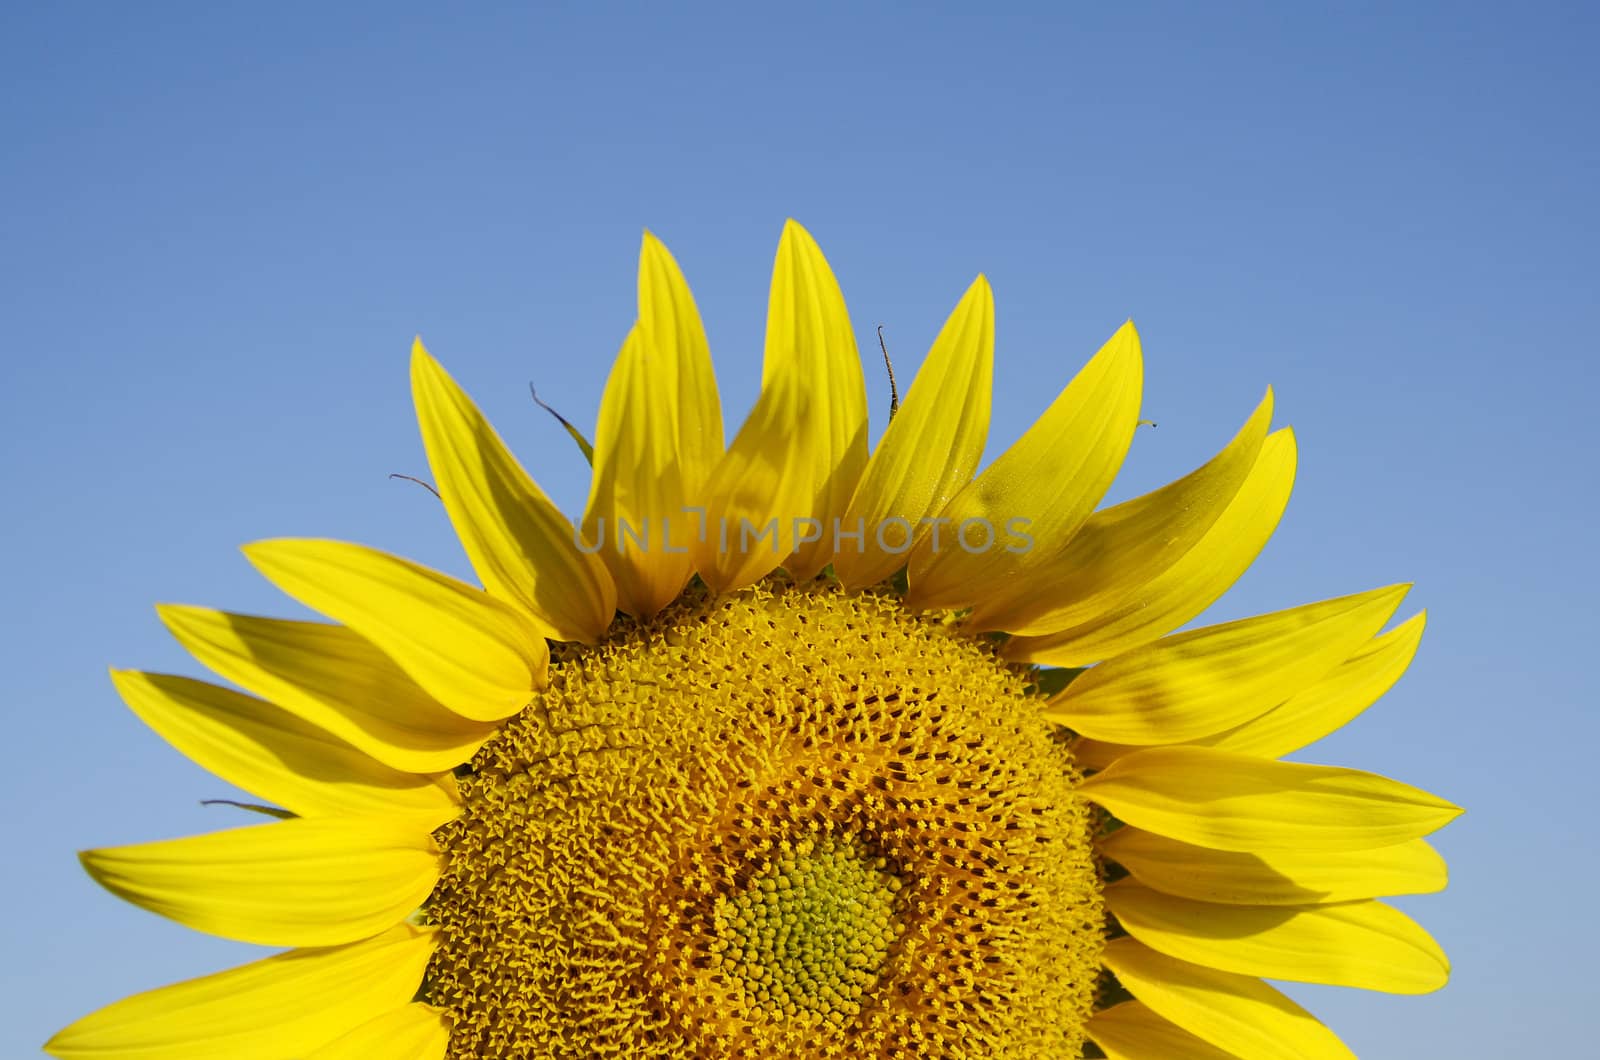 Sunflowers, with their warm color announce summer